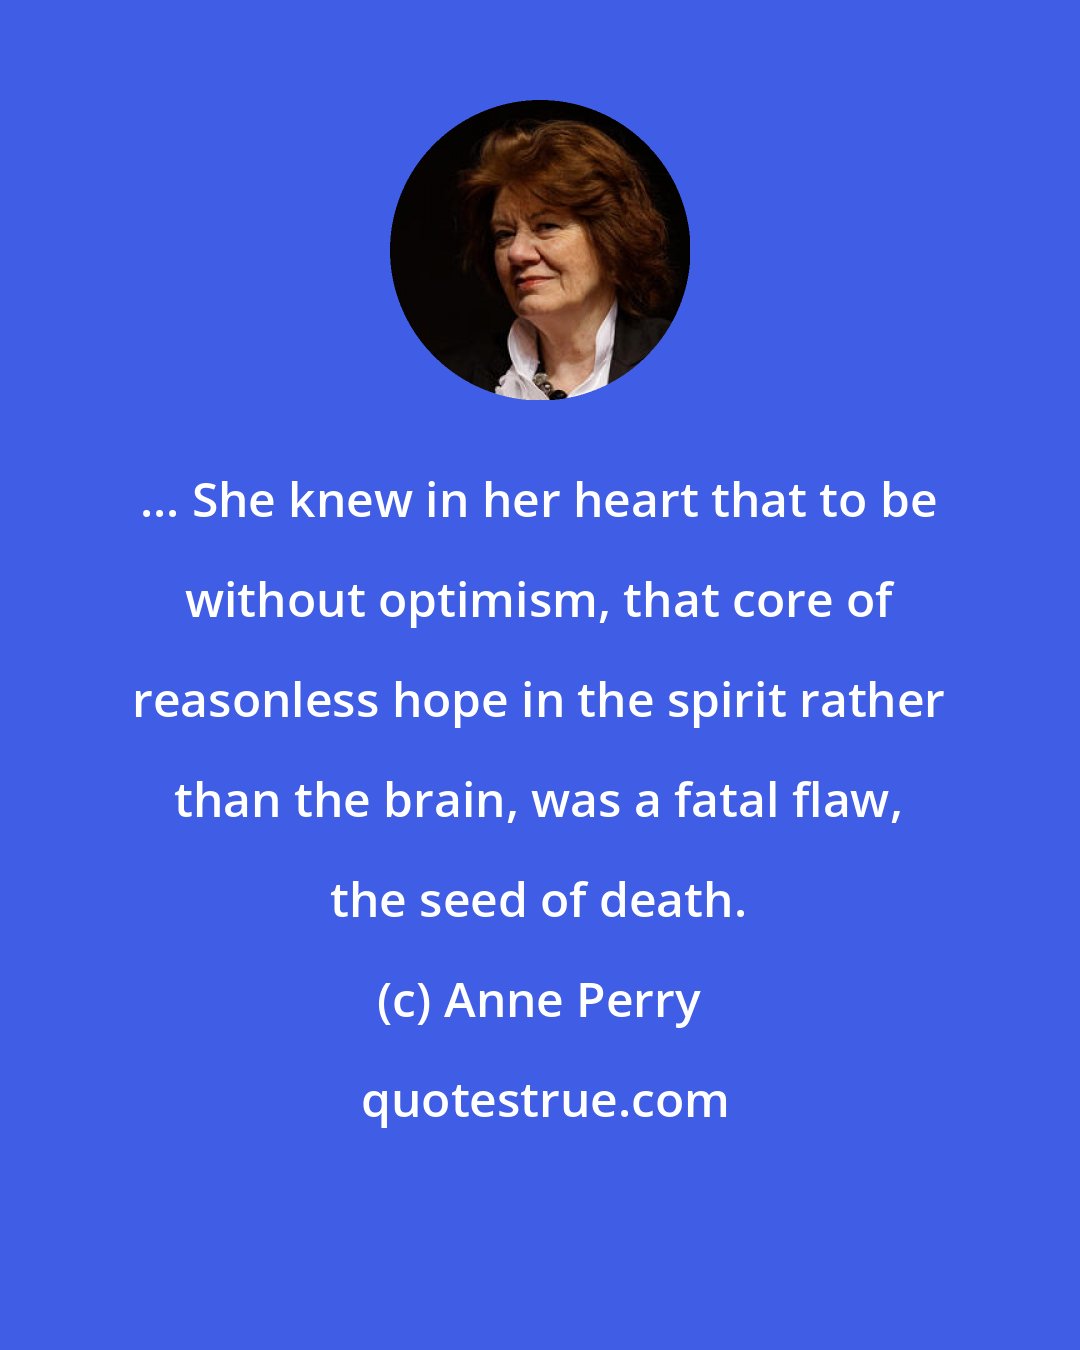 Anne Perry: ... She knew in her heart that to be without optimism, that core of reasonless hope in the spirit rather than the brain, was a fatal flaw, the seed of death.